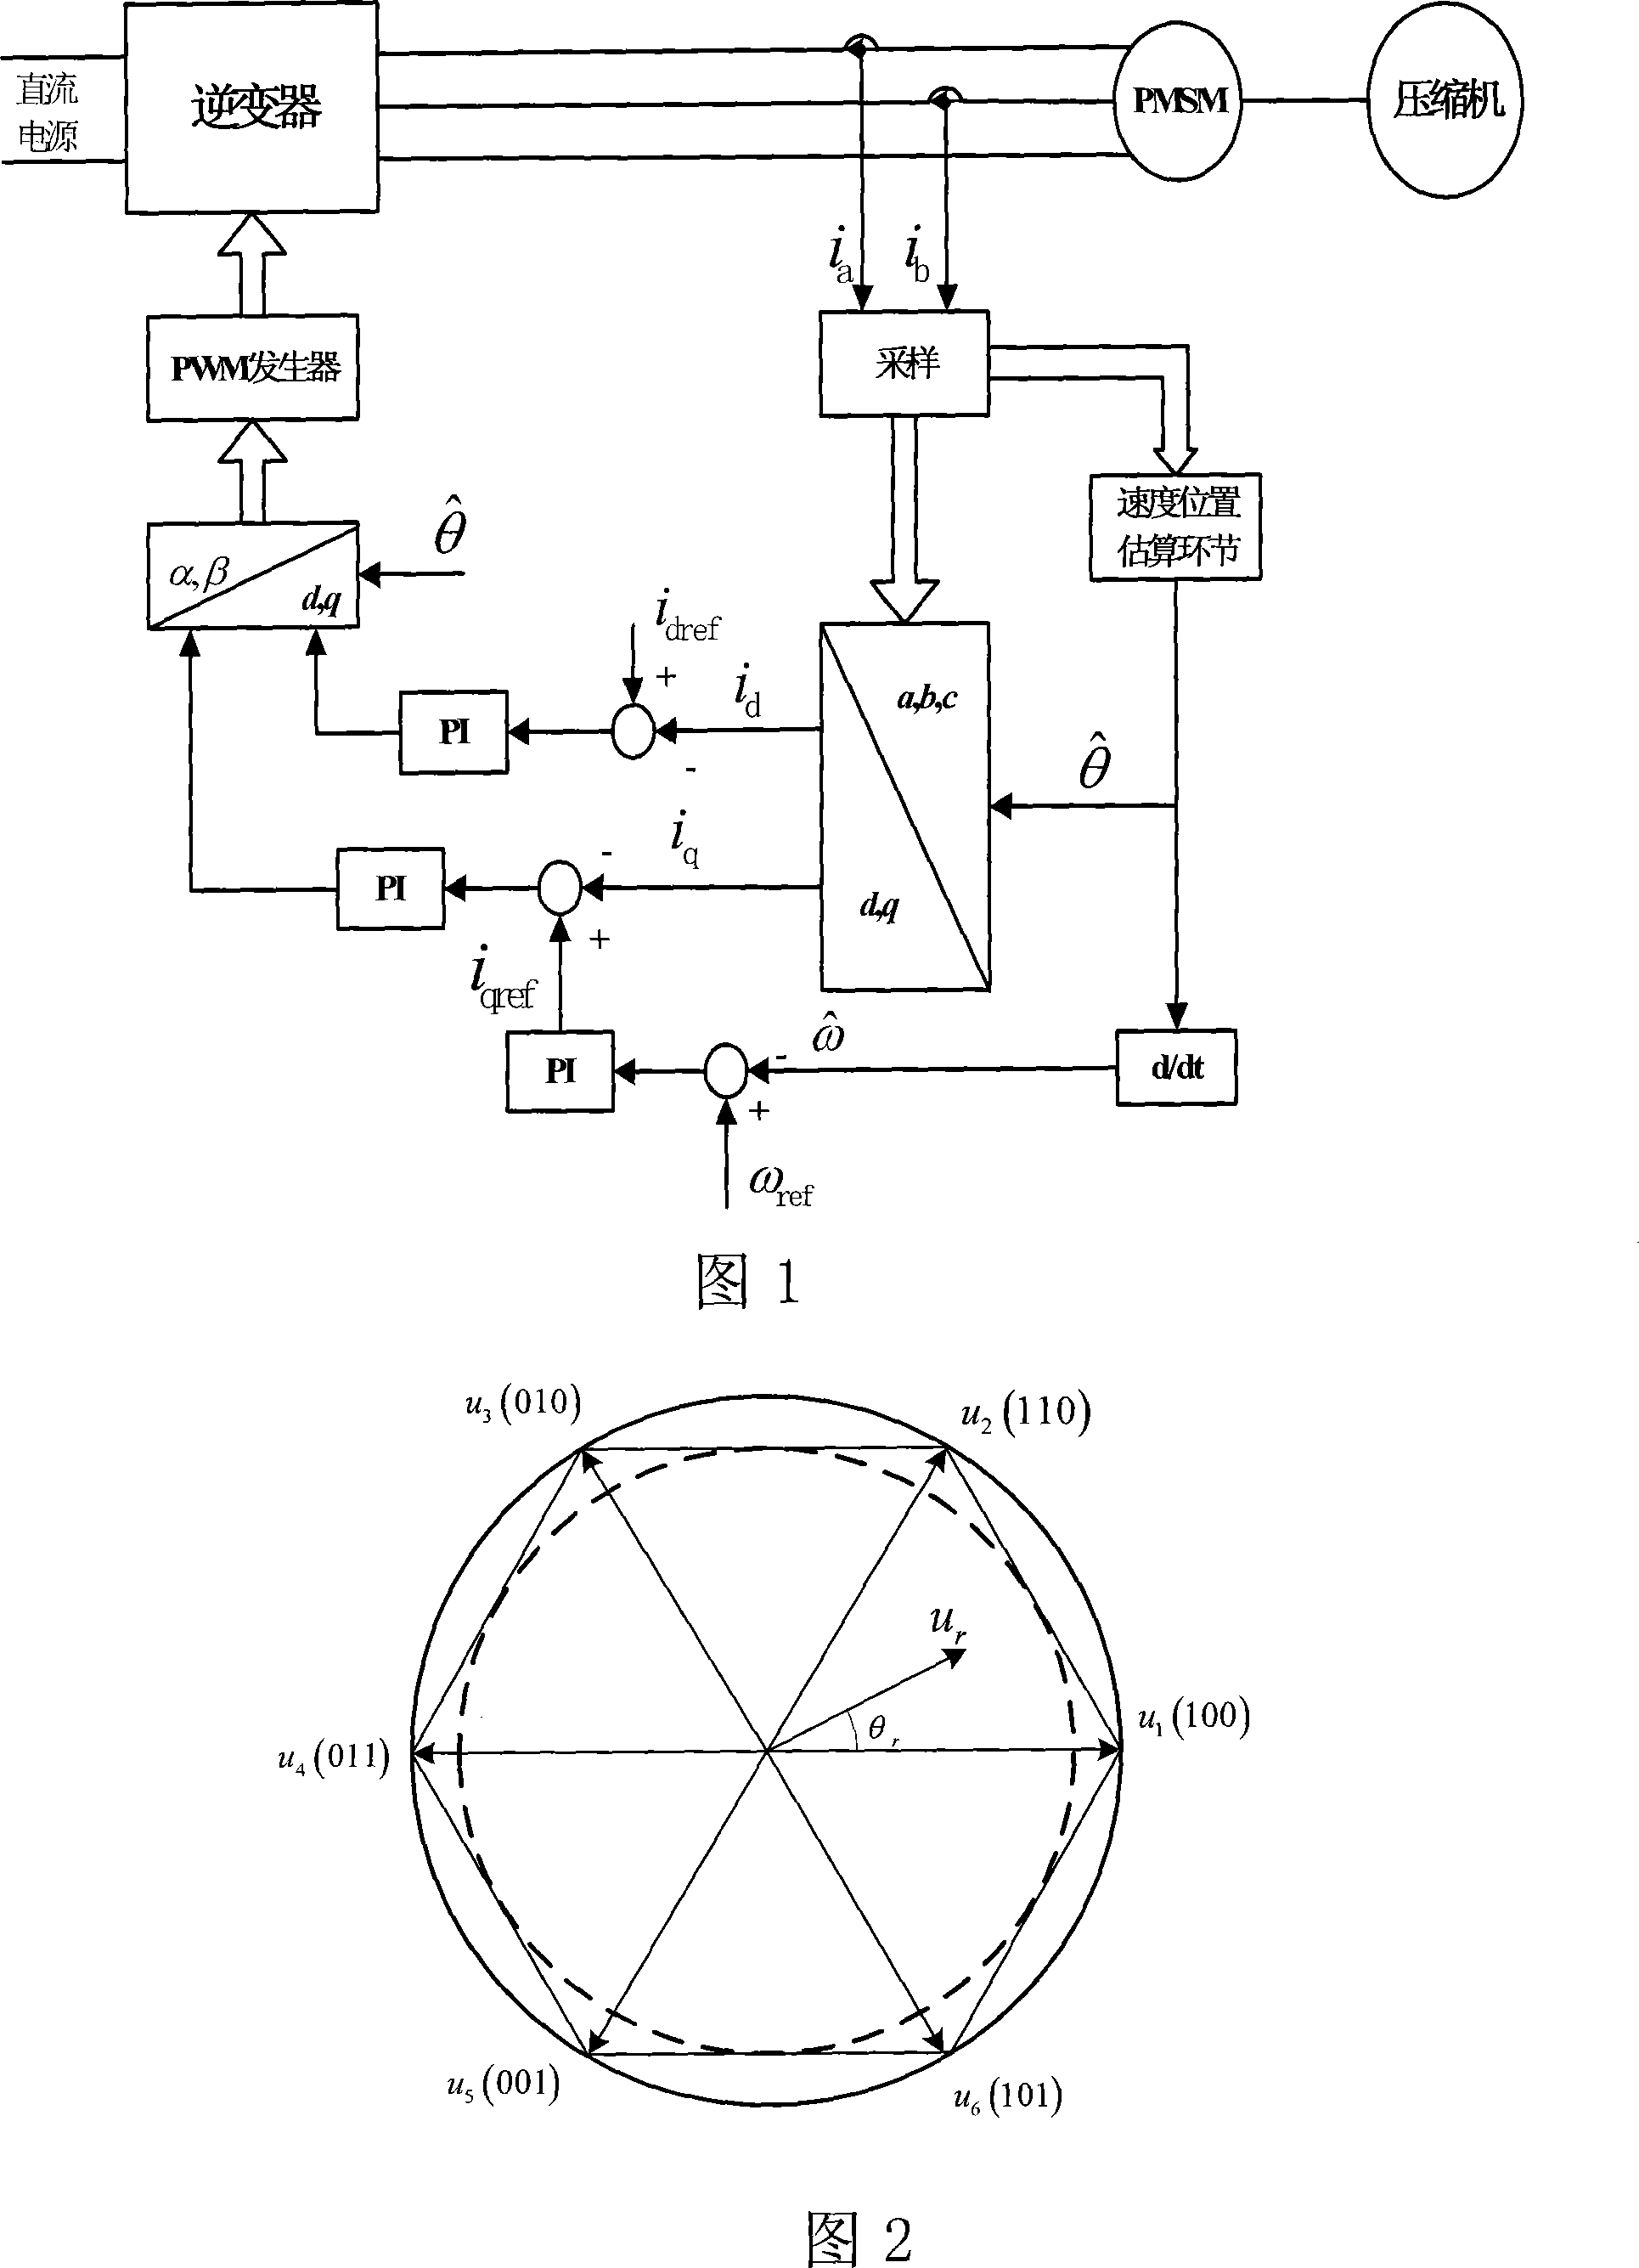 Permanent magnetism synchronous electric machine - compressor system high speed operation control method